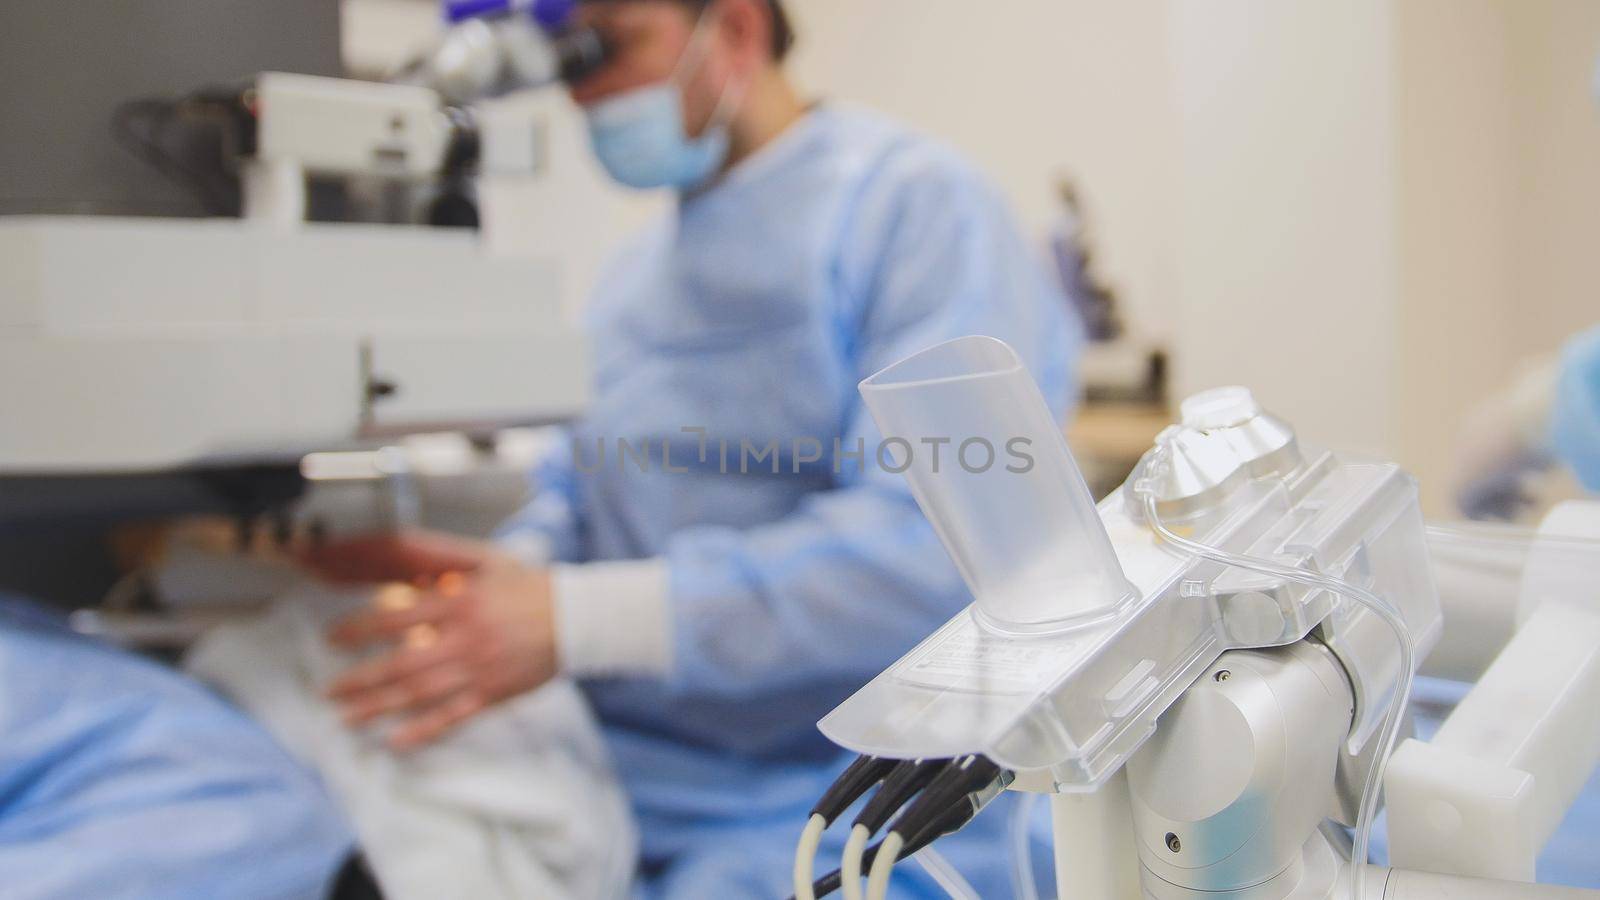 Surgical operations on the human eye - high technology health care equipment, de-focused